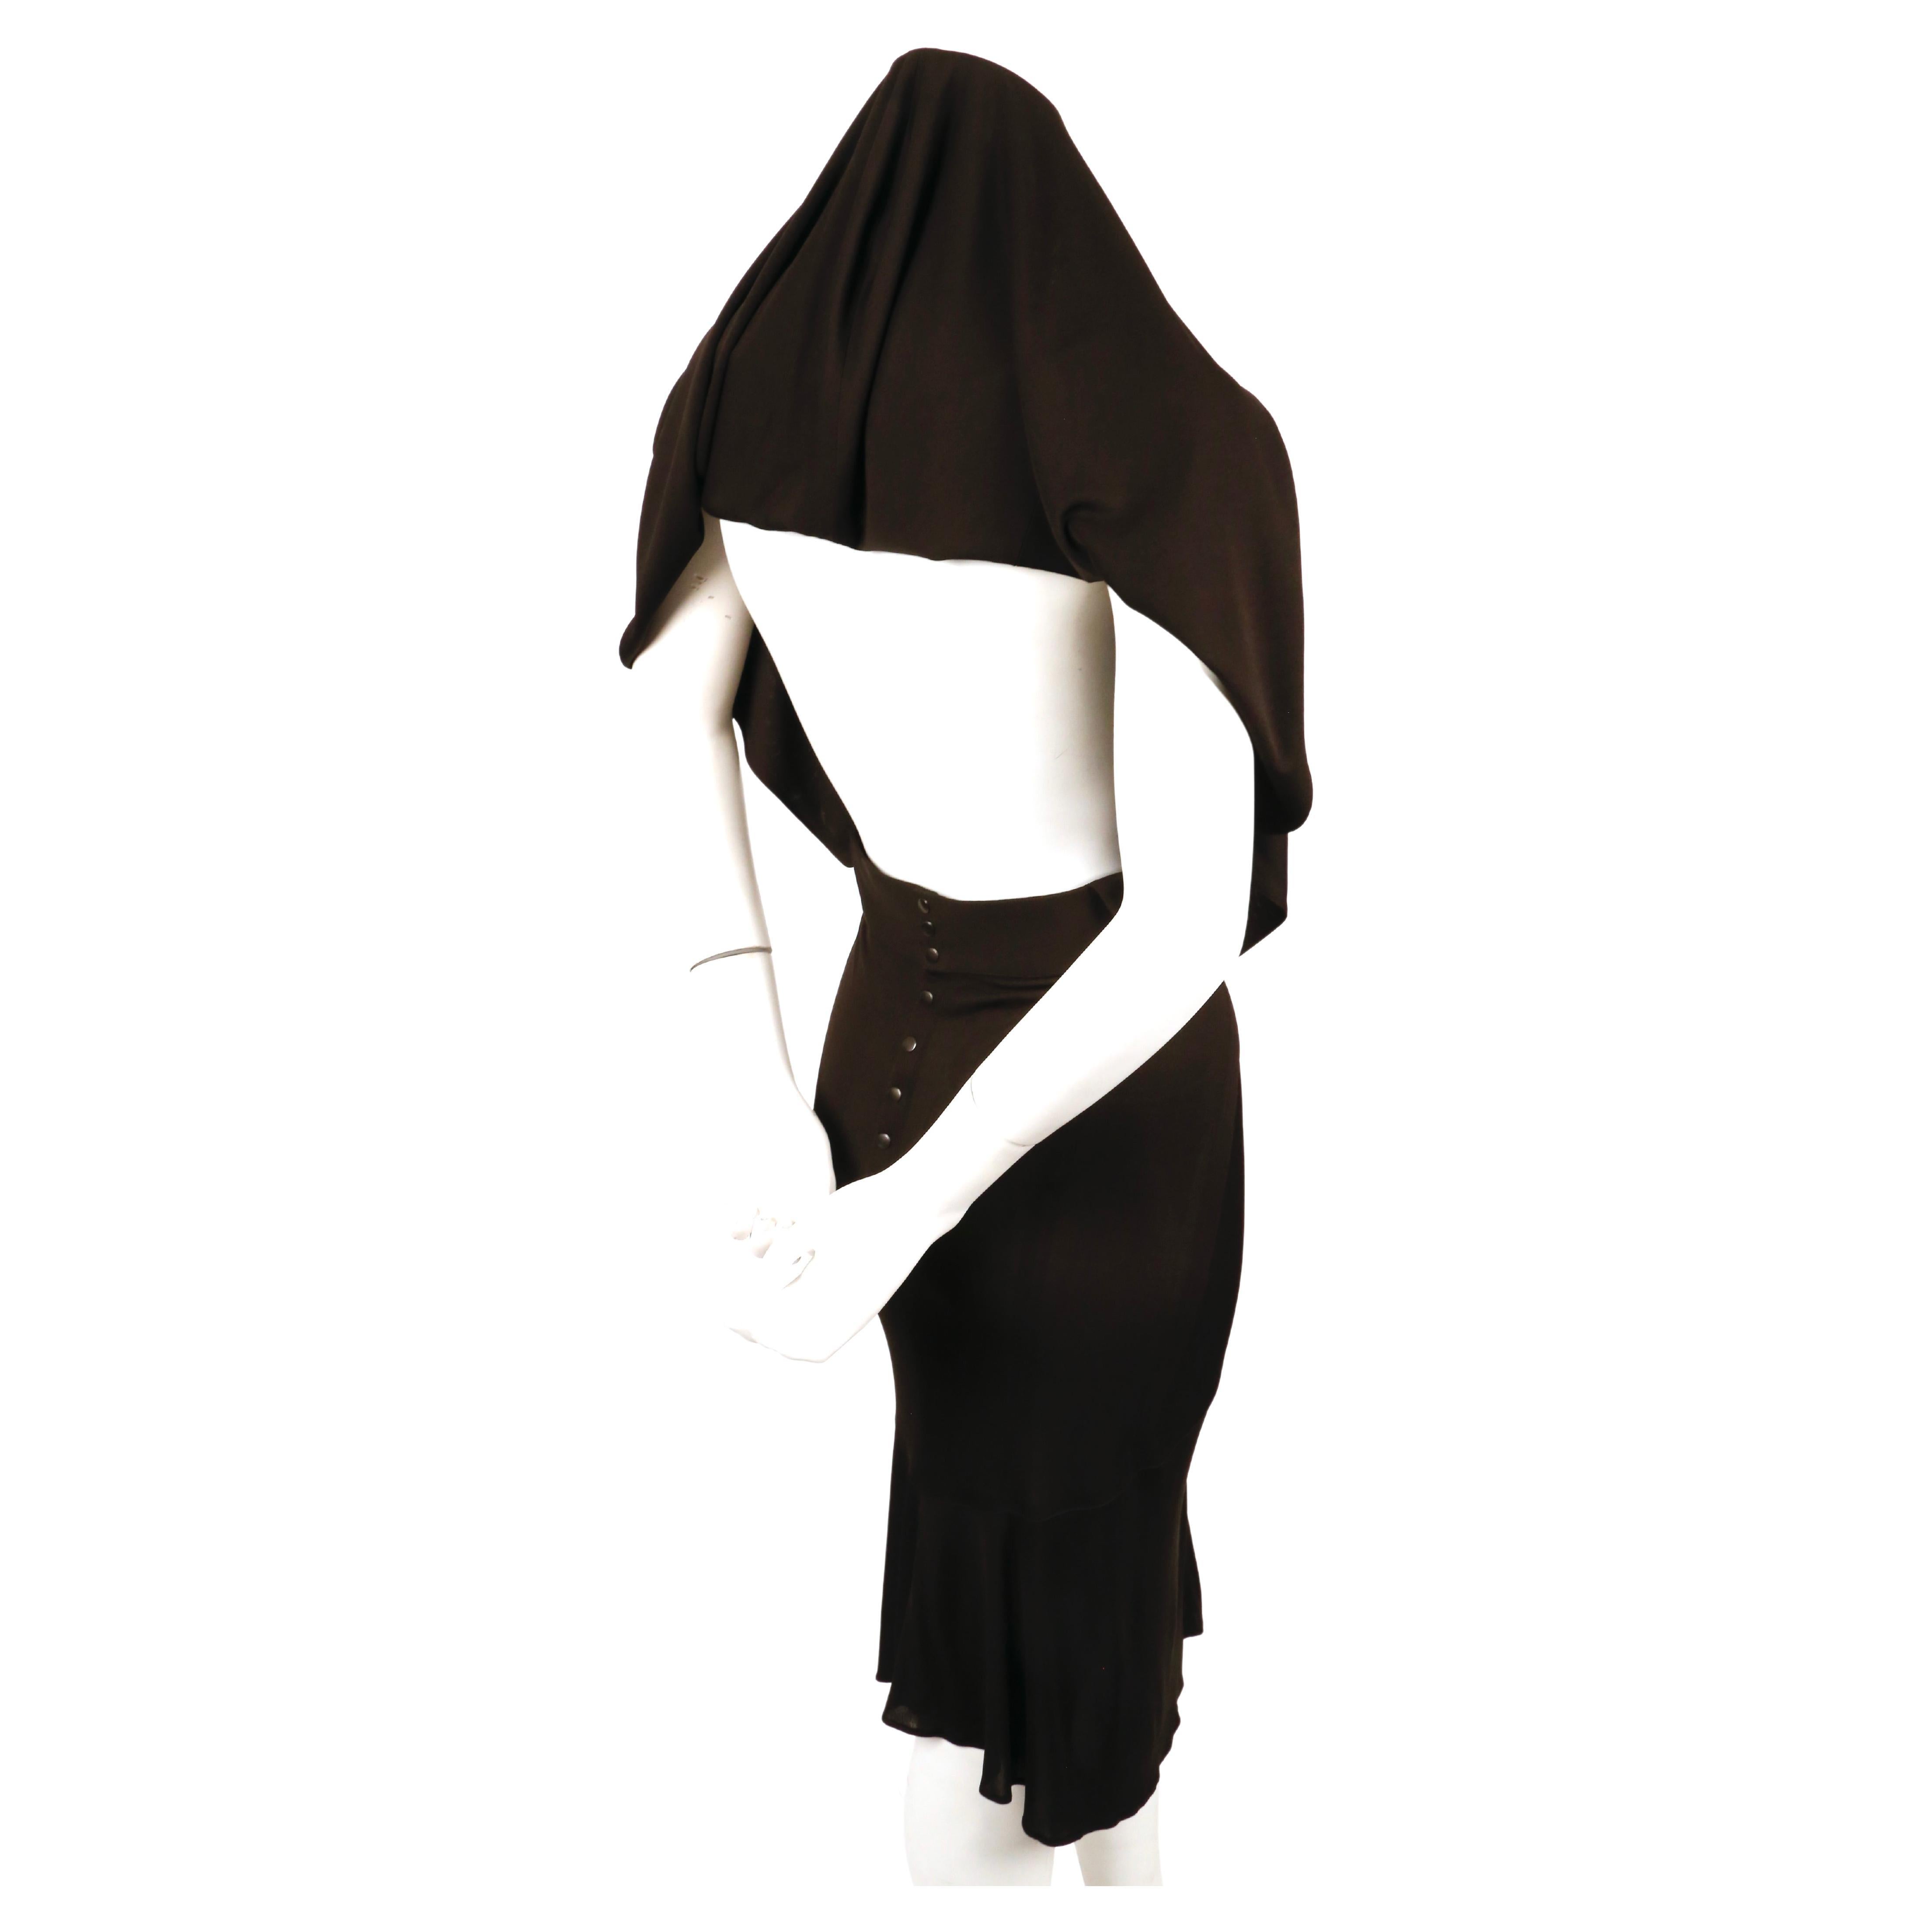 very rare 1984 AZZEDINE ALAIA iconic hooded jersey dress For Sale 9